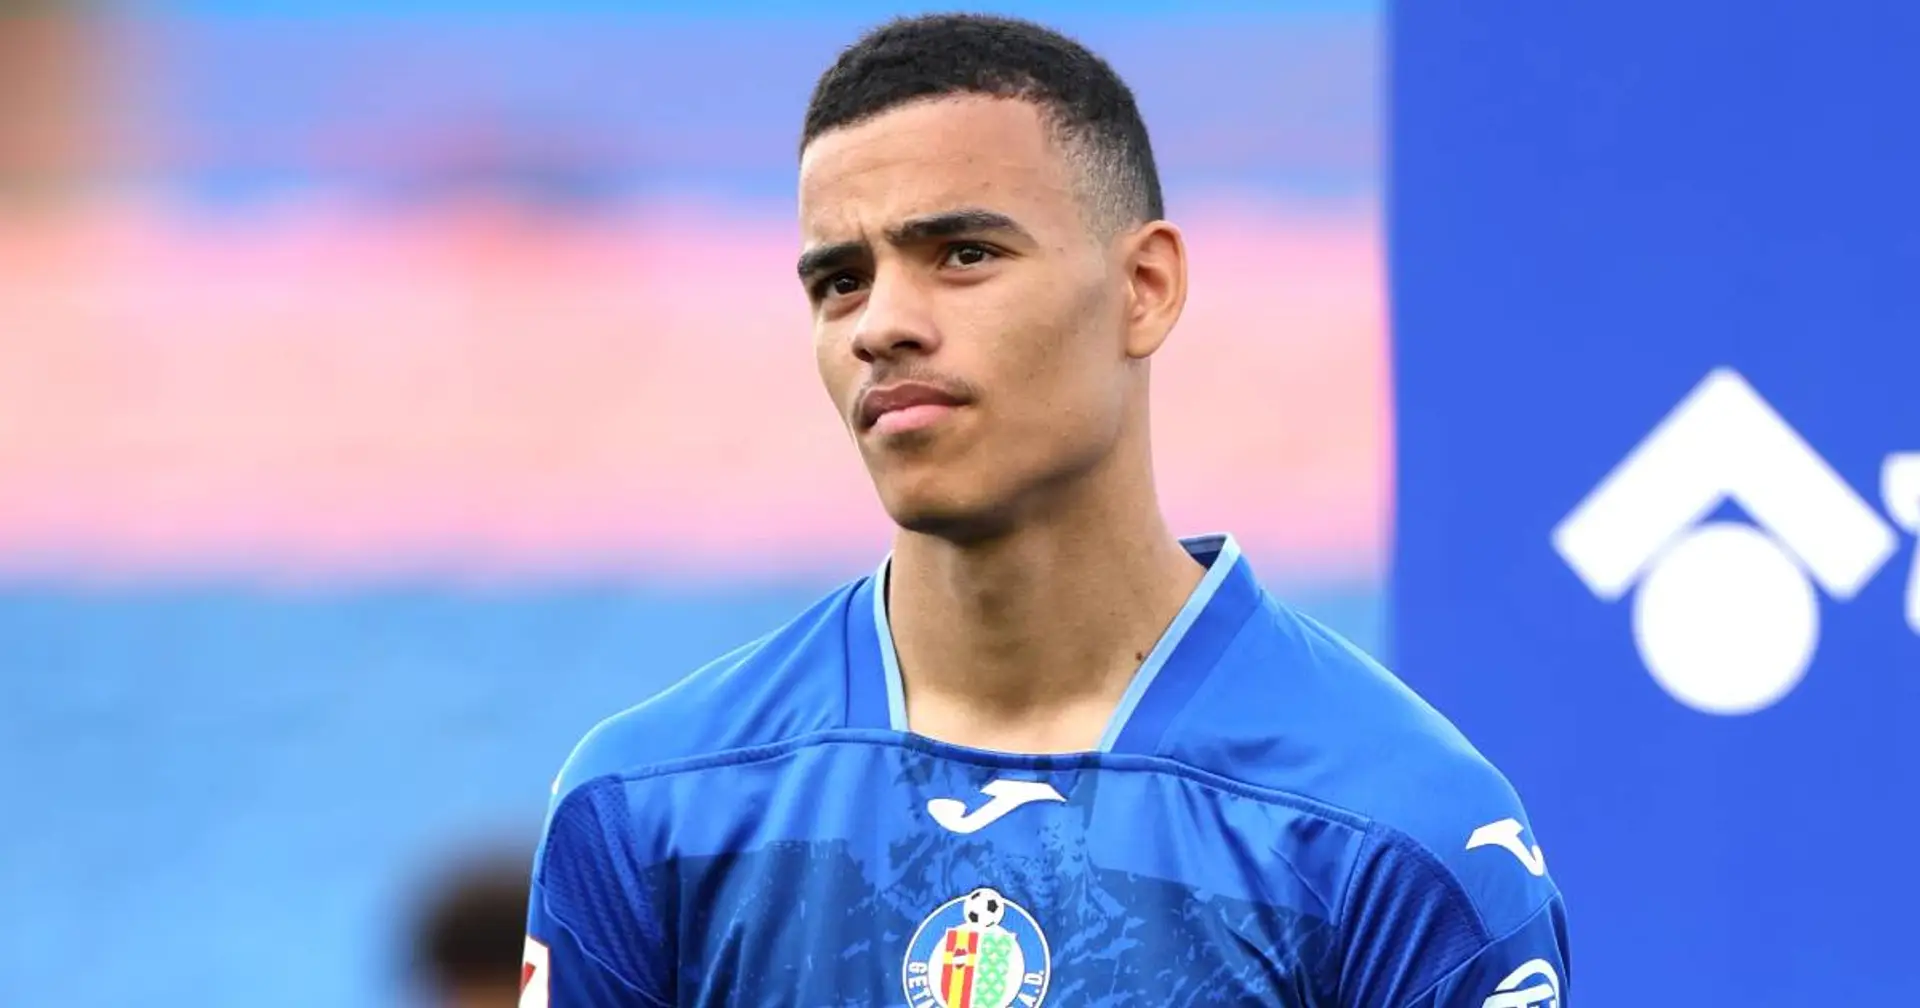 'Where are our values?': Some Barca fans say they'll stop supporting club if Mason Greenwood joins